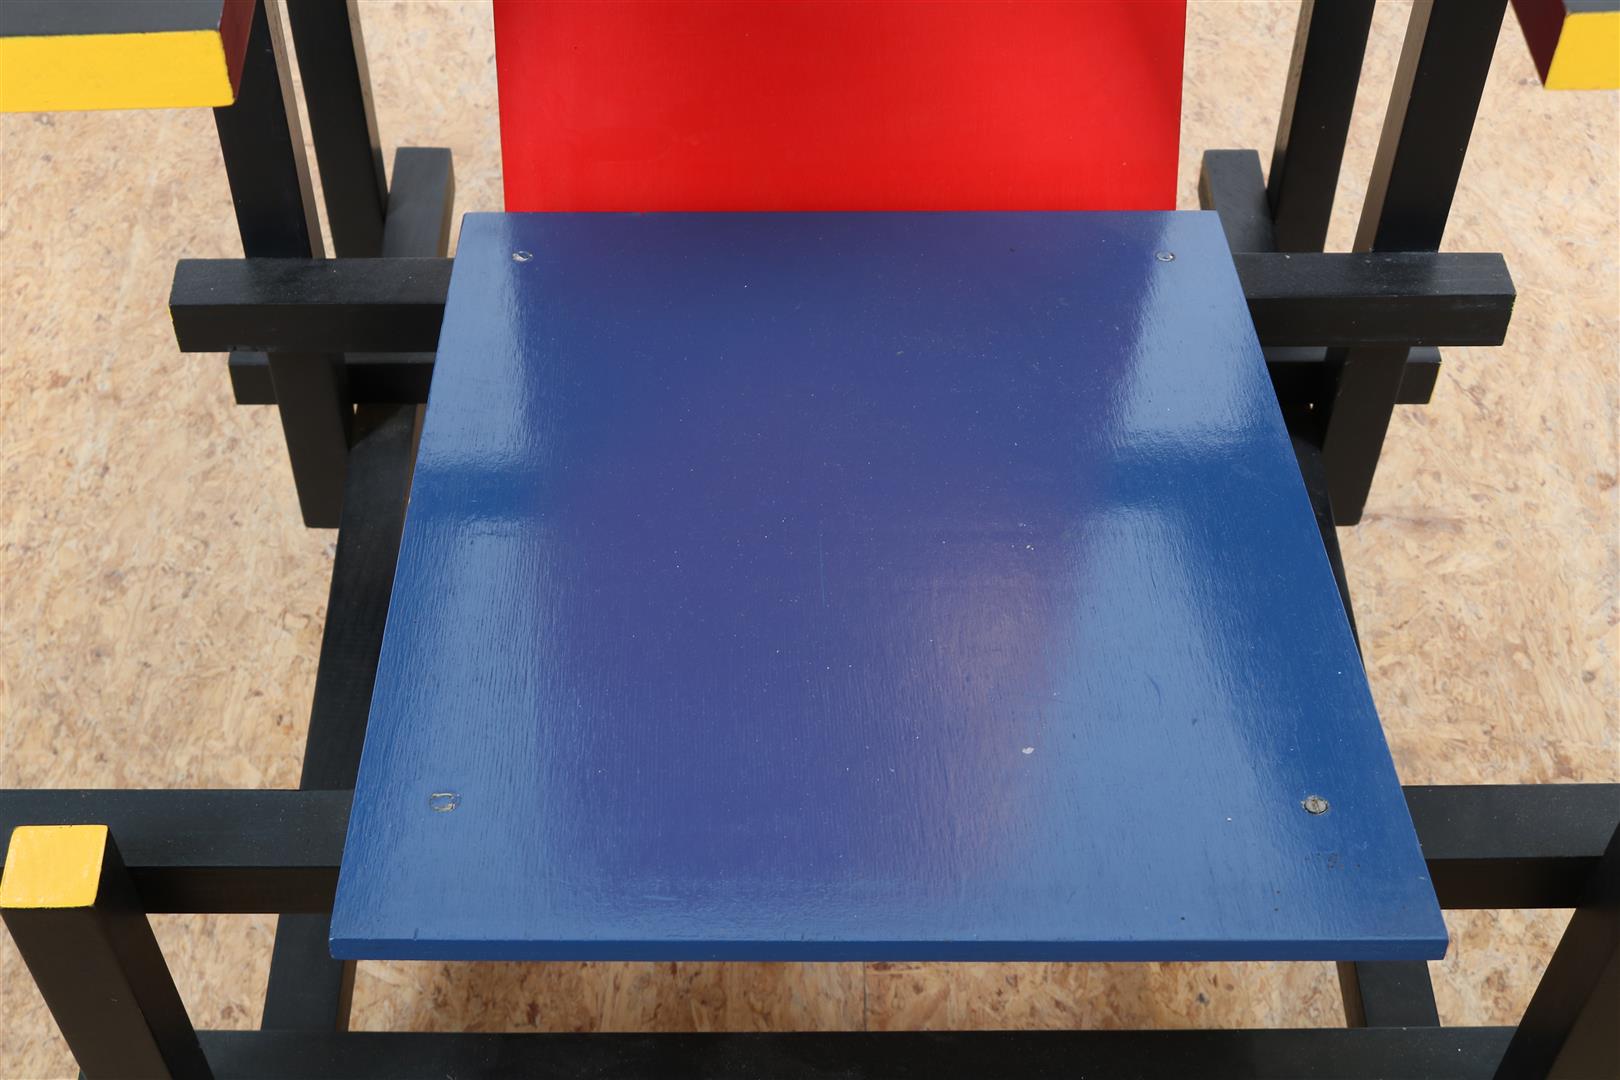 Lacquered wooden chair, so-called 'red-blue chair', after Gerrit Rietveld - Image 4 of 4